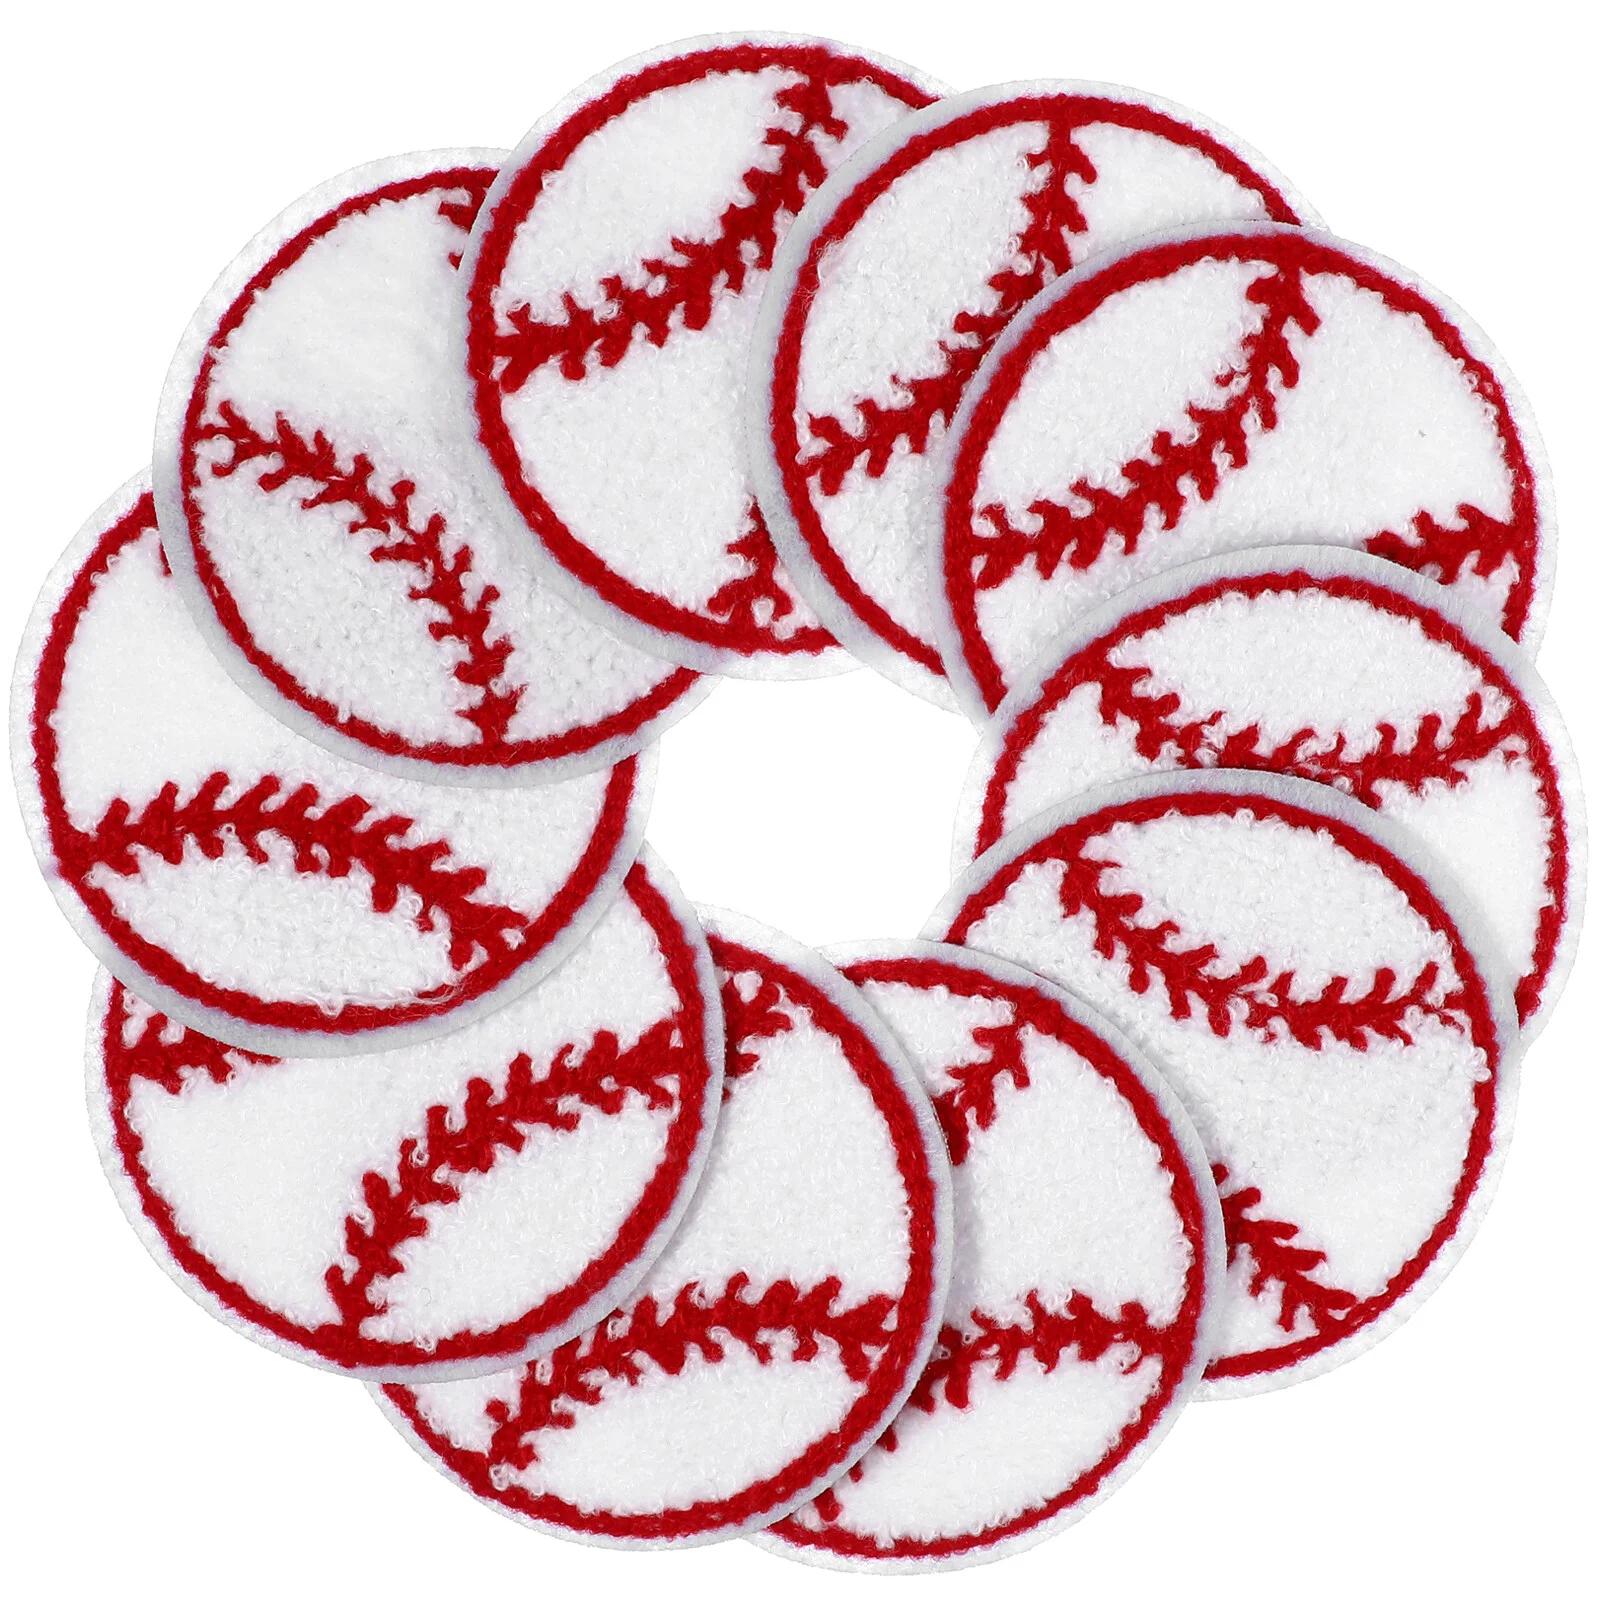 

10 Pcs Baseball Patch Floral Decor Small Clothes Patches Daily Use Hat Delicate Coat Compact Towel Embroidery Accessories